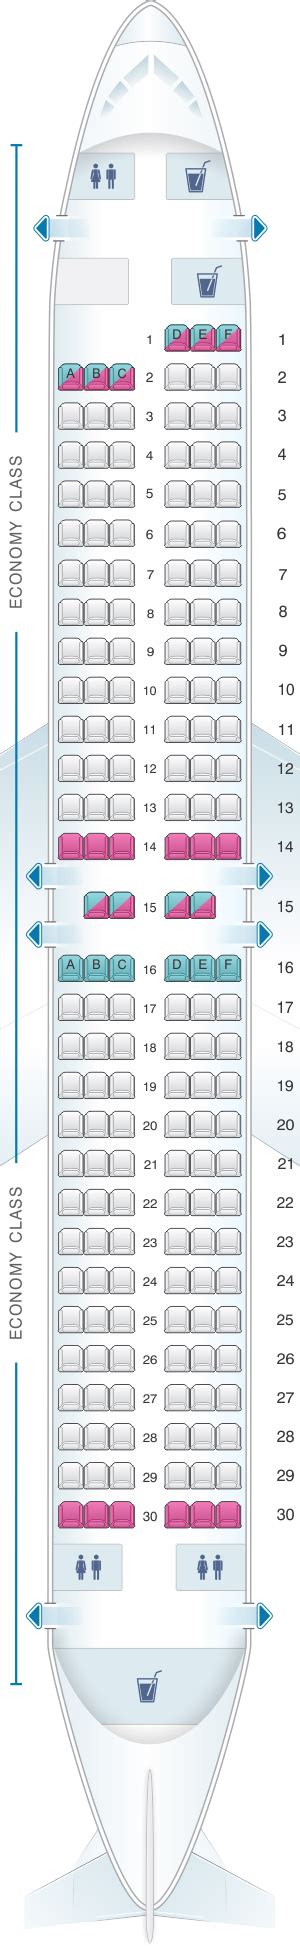 Seat configuration: 2-2: 3-3: 3-3: Standard seat pitch (the measure of legroom space between a point on one seat and the same point on the seat in front of it) 37" (93 cm) 34" (86 cm) 30" – 31" (76 cm – 78 cm) Standard seat recline (the distance between a seat back in its full upright and full recline position) 5" (12 cm) 3" (7 cm) 2" (5 cm .... 